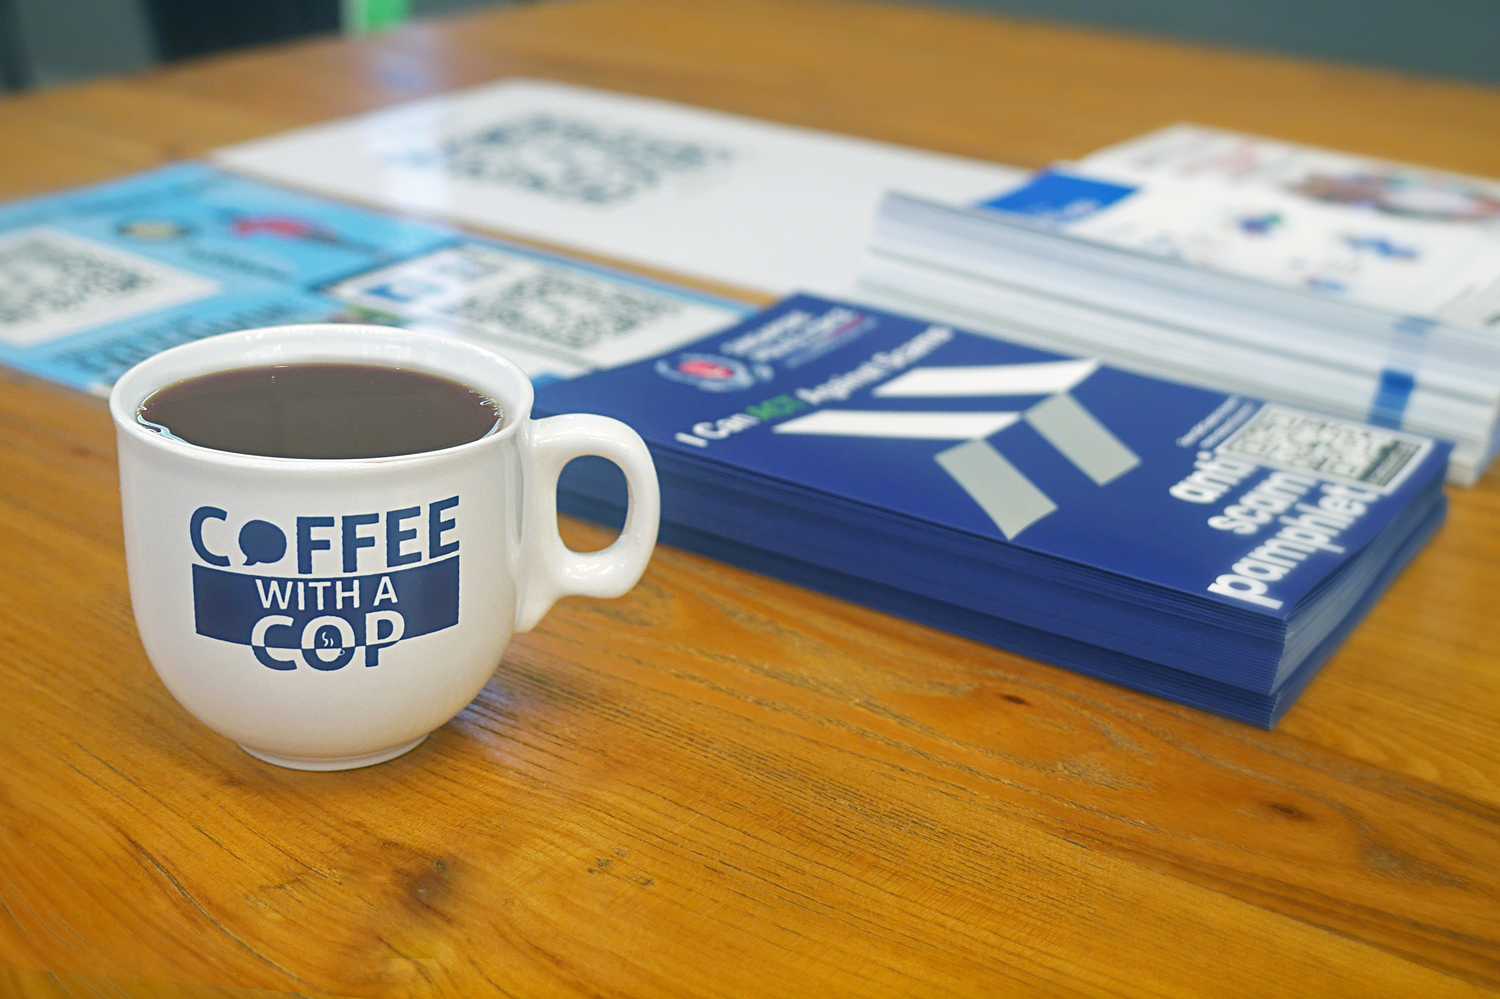 A coffee with a cop cup is placed on a wooden table beside a Police Anti-Scam pamphlet.